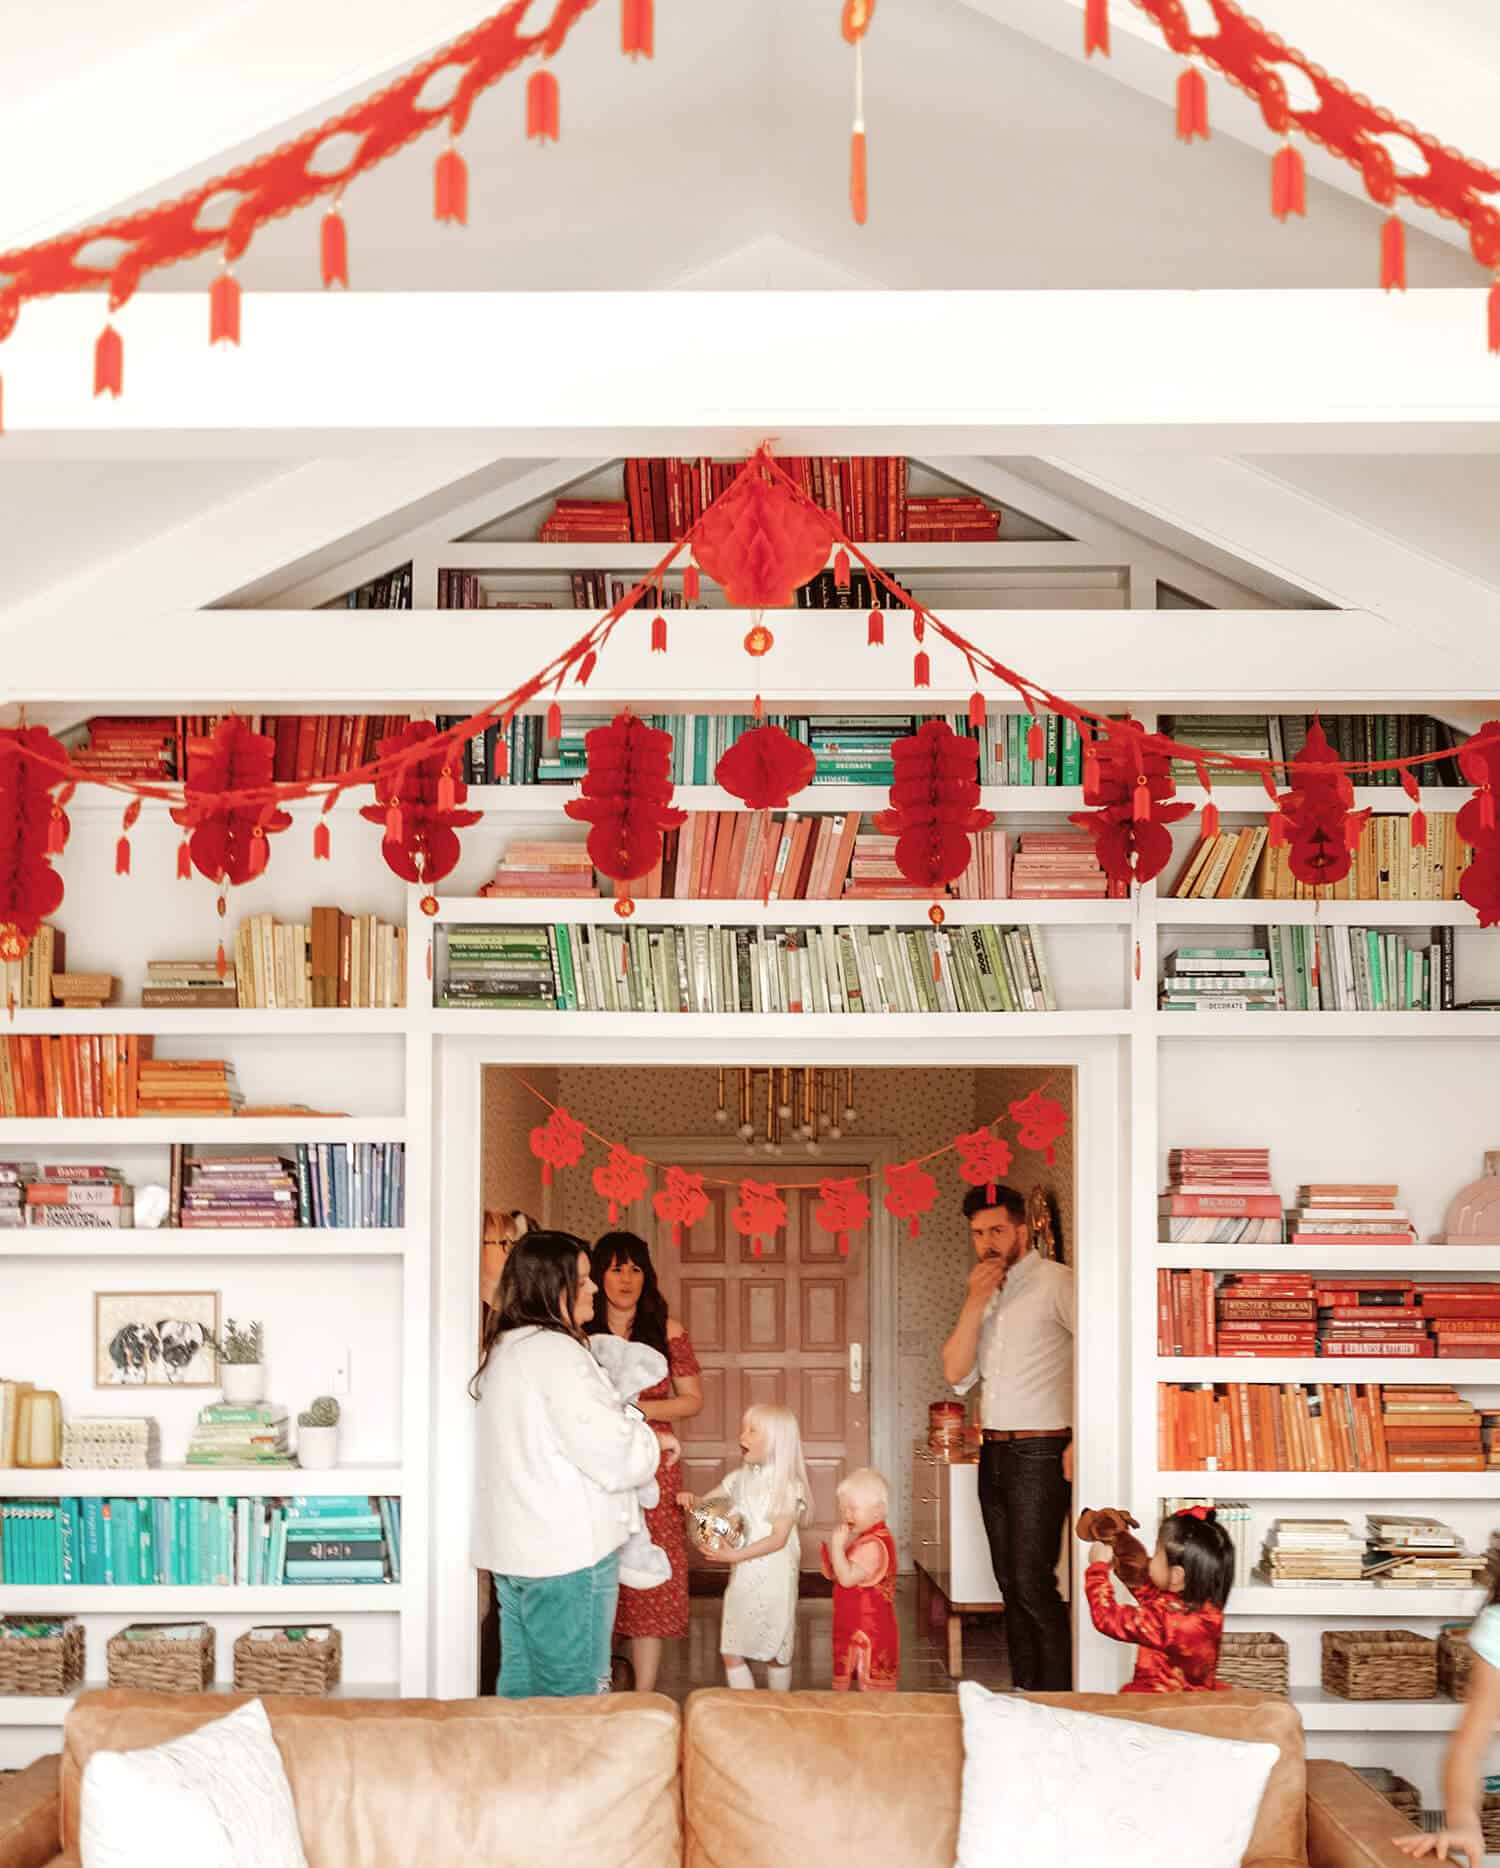 Home decorated in red decor for Lunar New Year